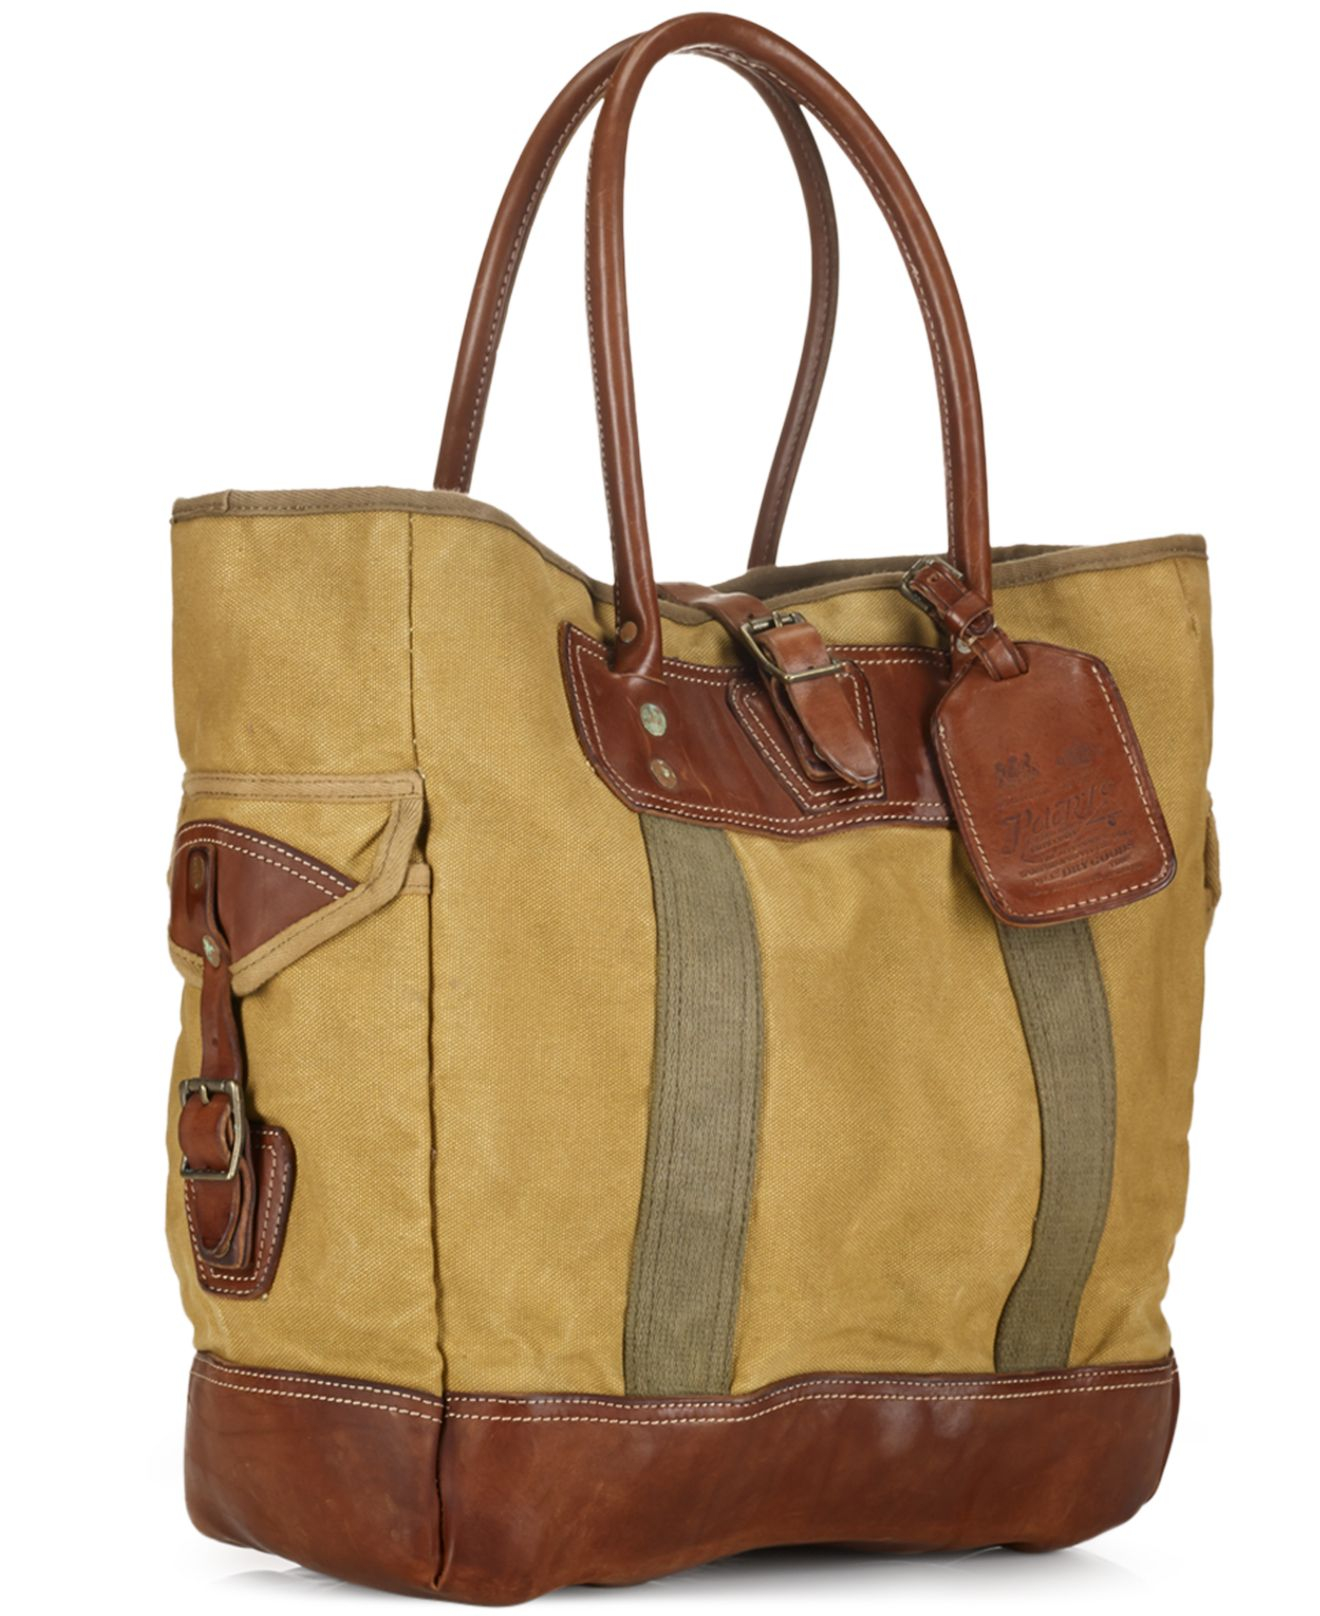 Polo ralph lauren Leather-Trimmed Canvas Tote in Brown | Lyst